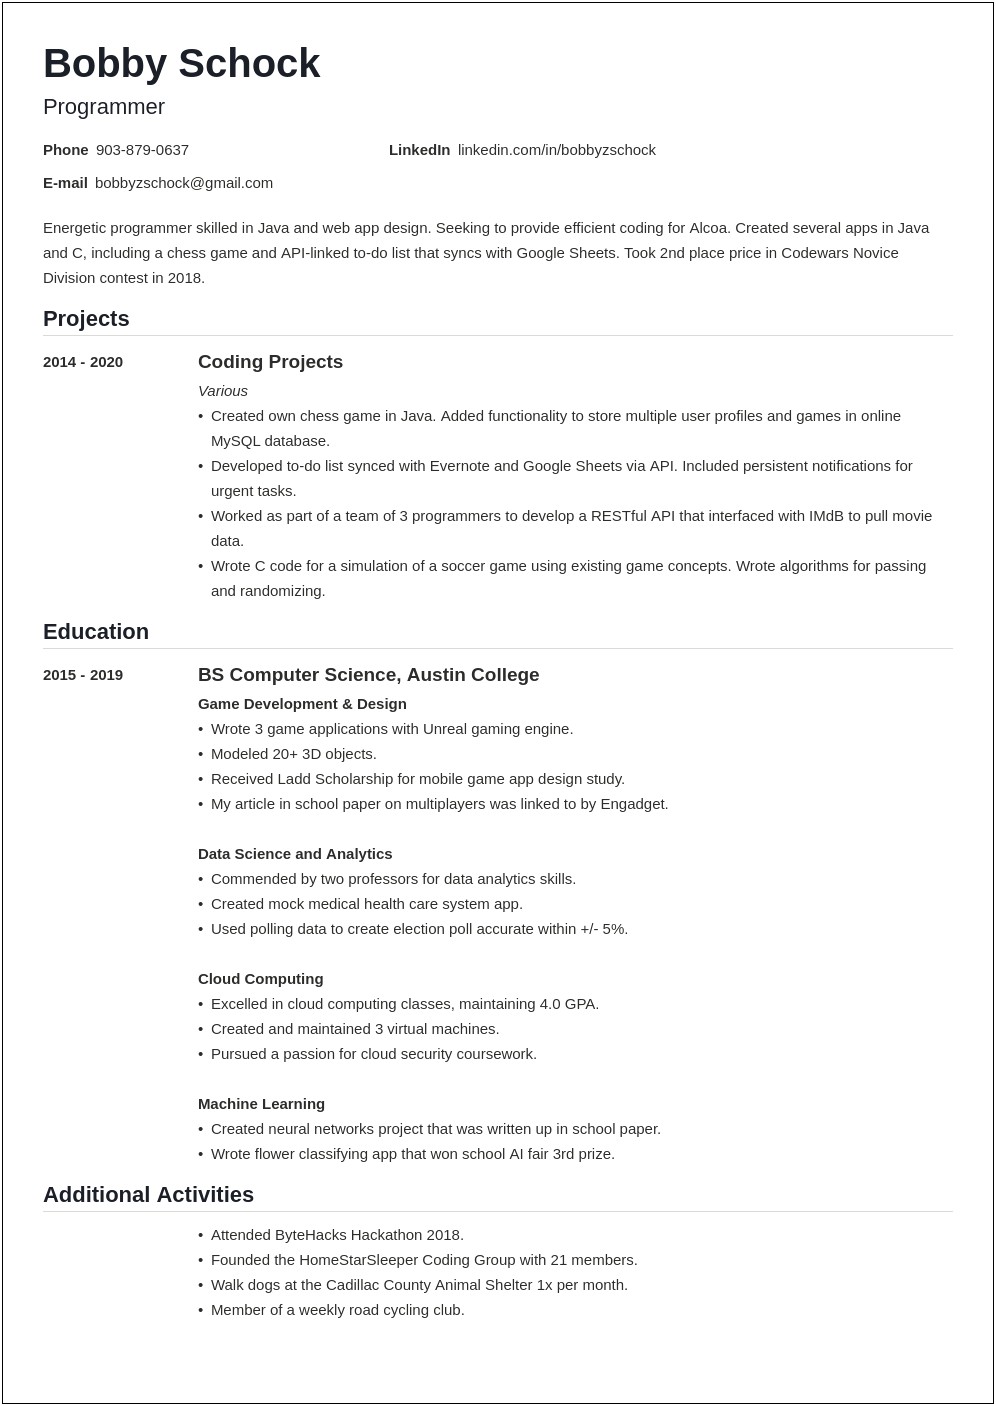 Guide To Writing A Resume Without A Template